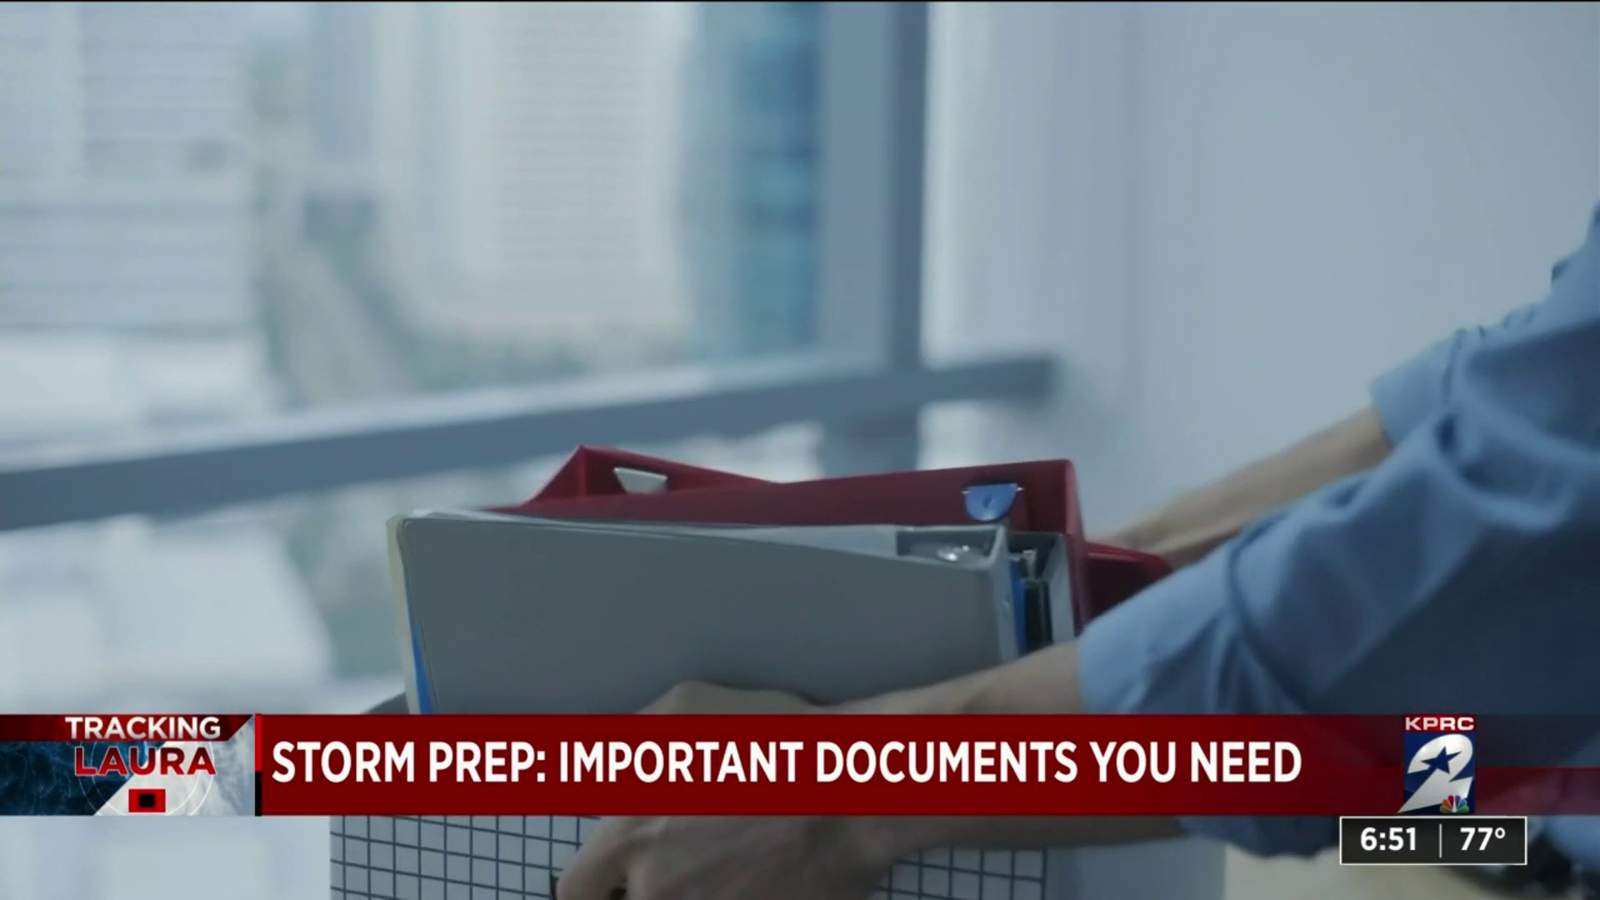 Here are some important documents you may need in case of storm damage